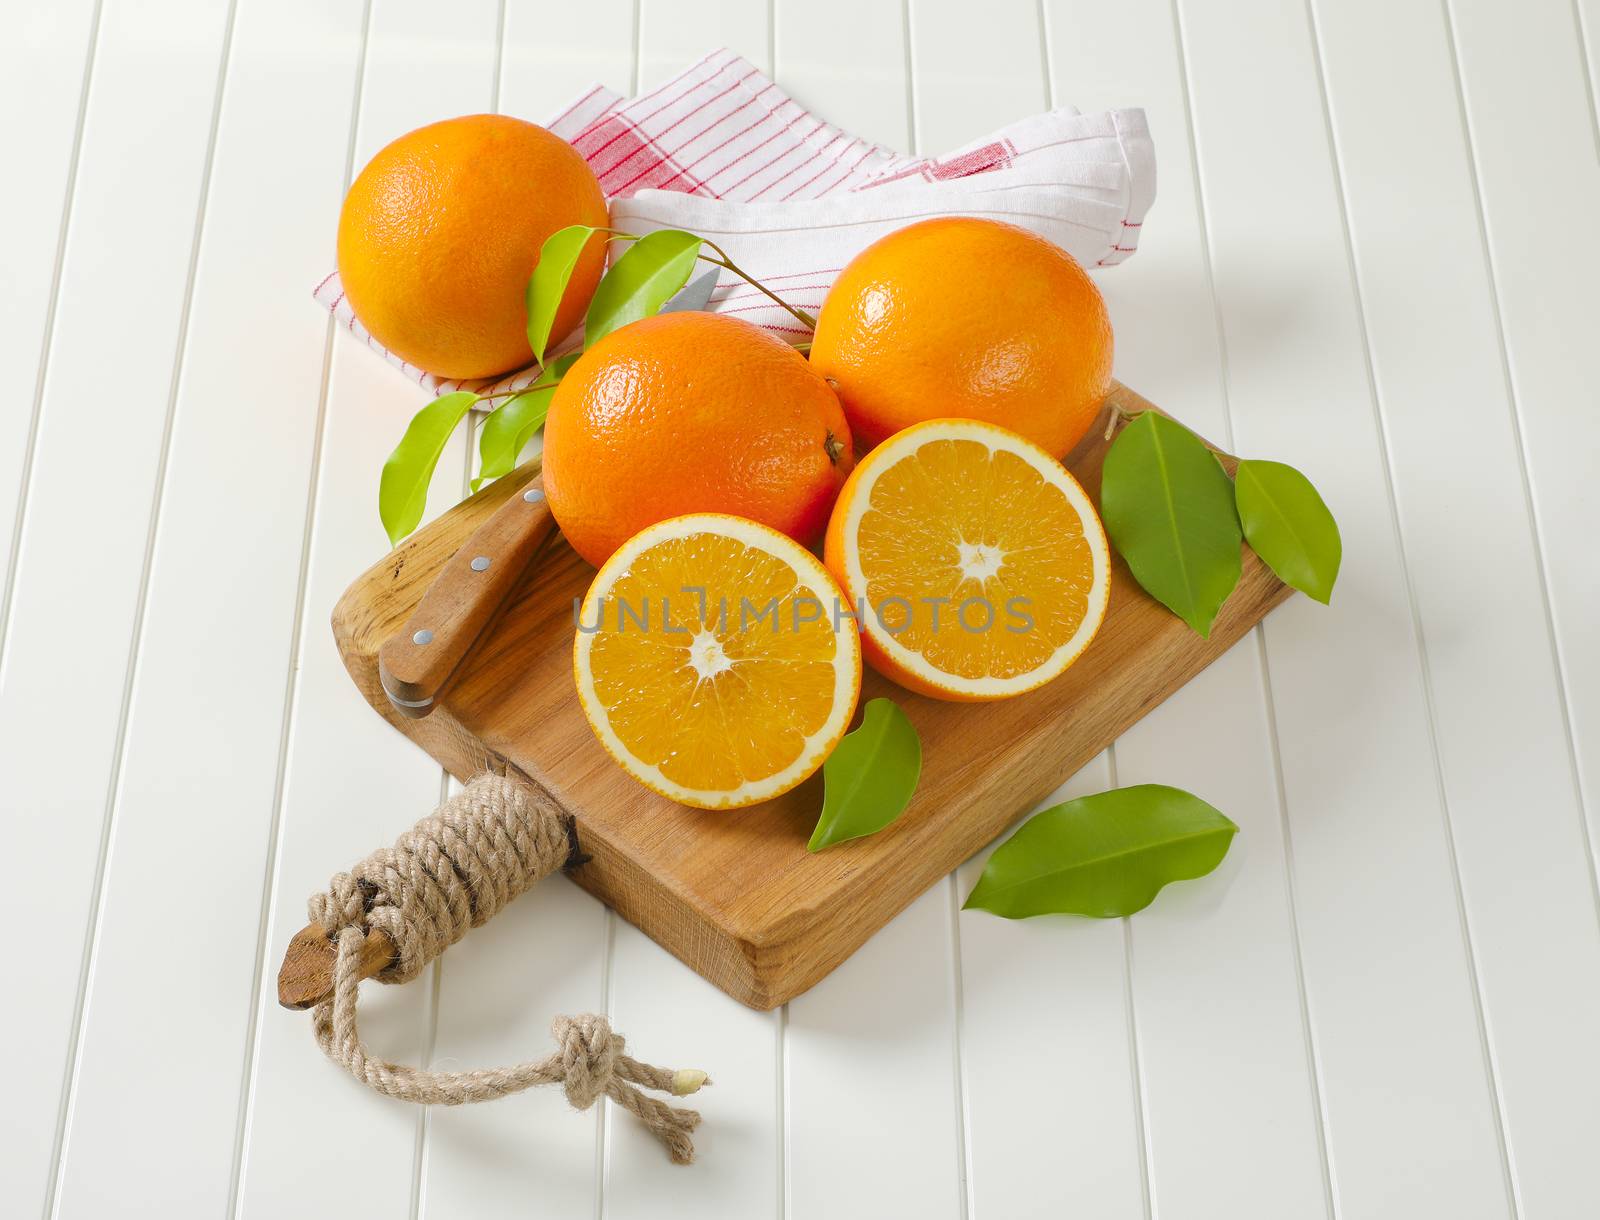 Whole ripe oranges and two halves on cutting board